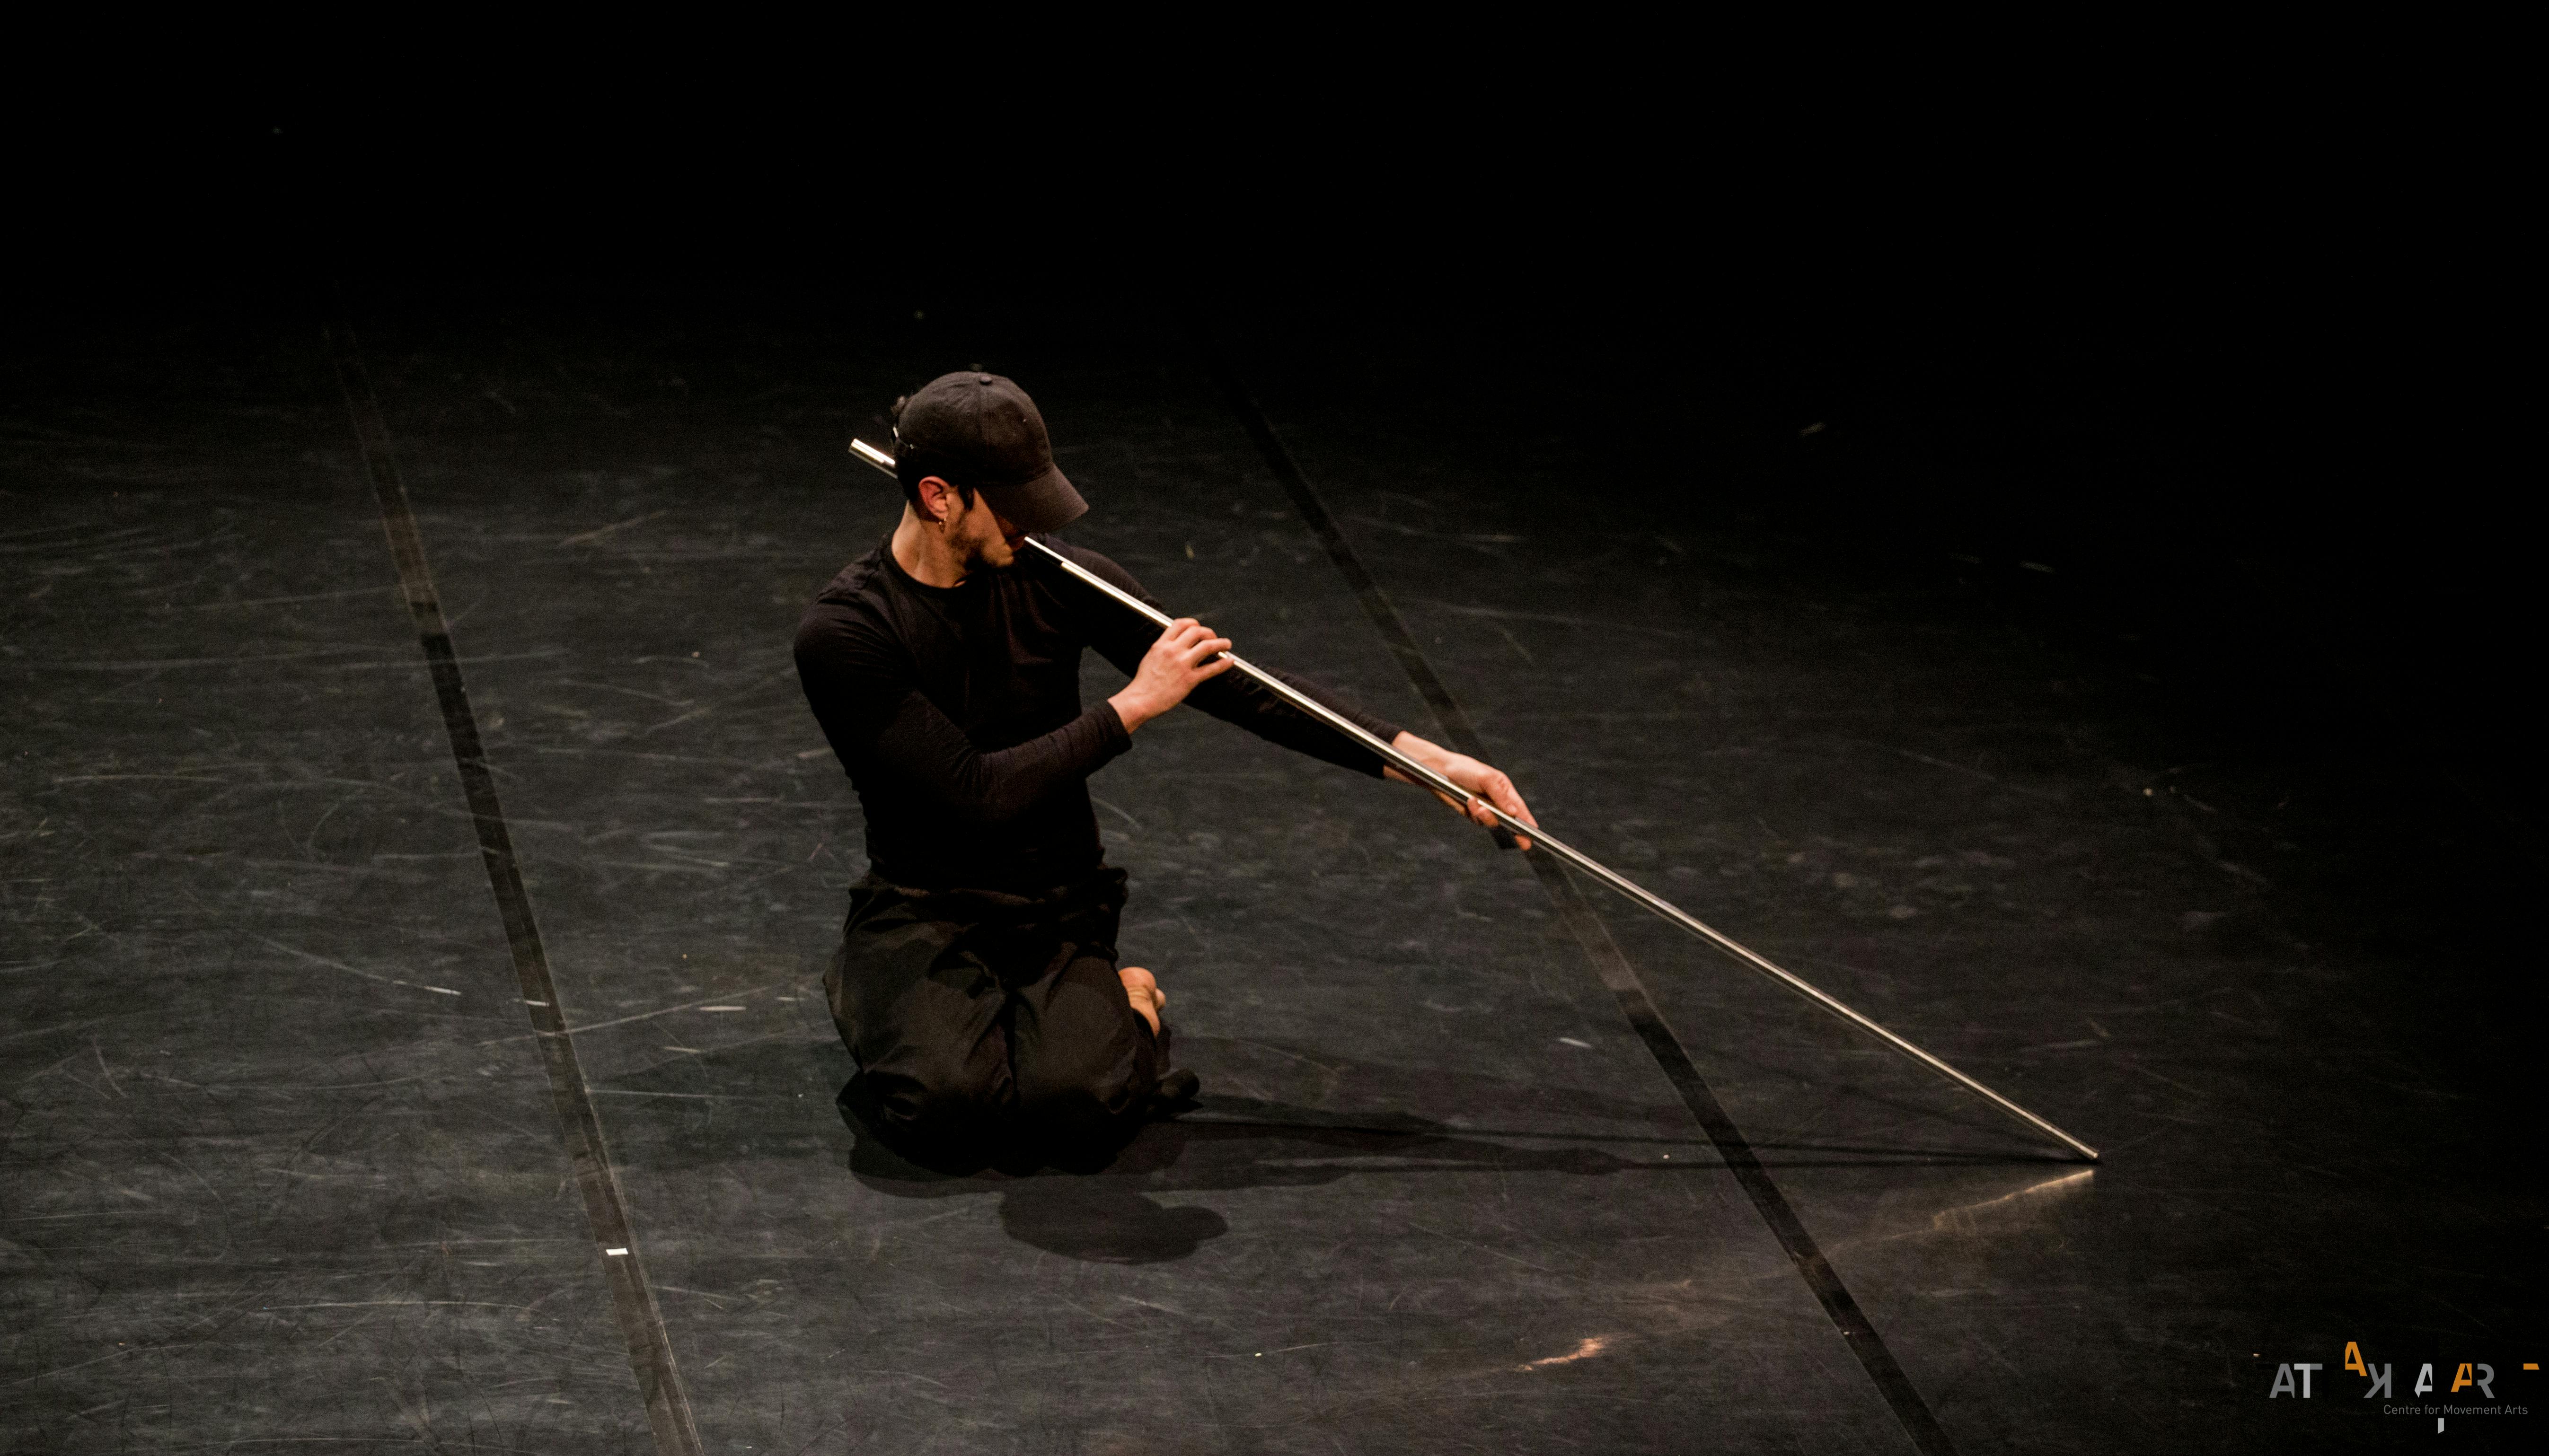 Davide Valrosso on stage dressed in black and a steel staff